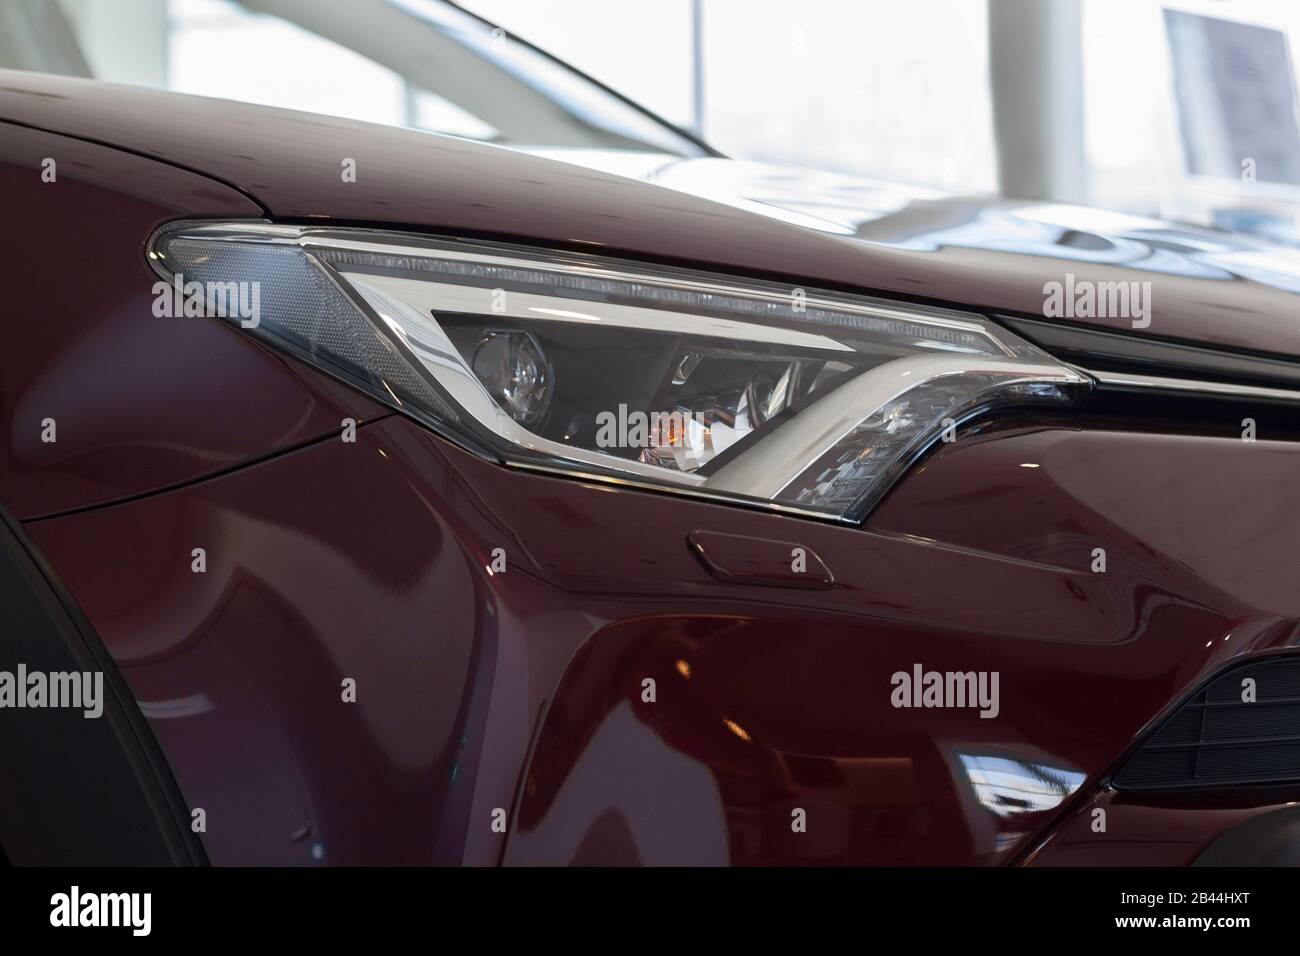 New vehicle of cherry color with elegant head lamps in showroom. Side view. Stock Photo